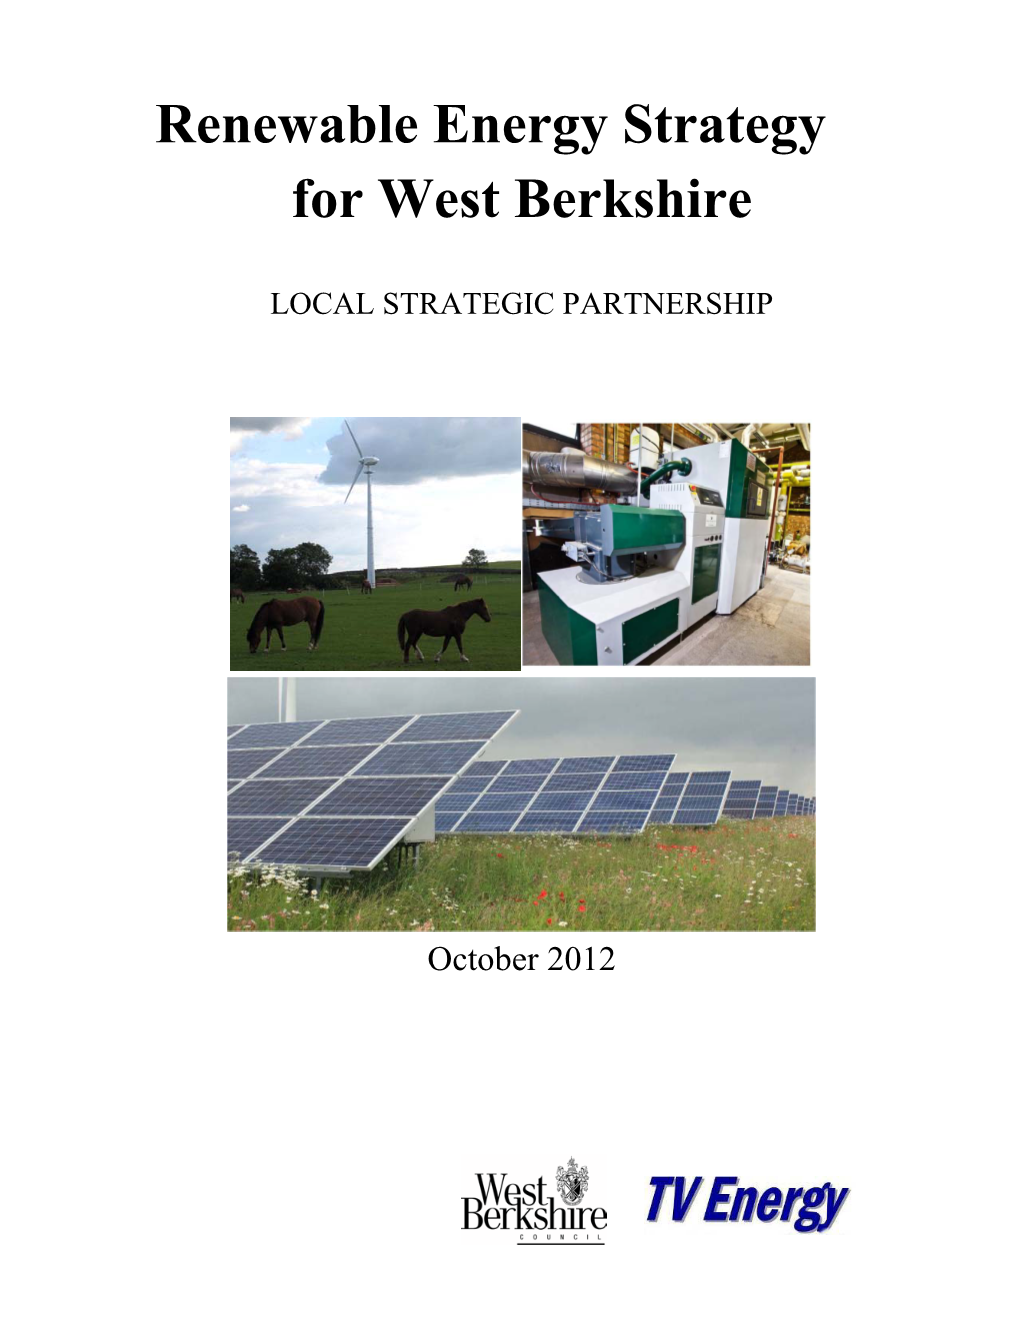 Renewable Energy Strategy for West Berkshire